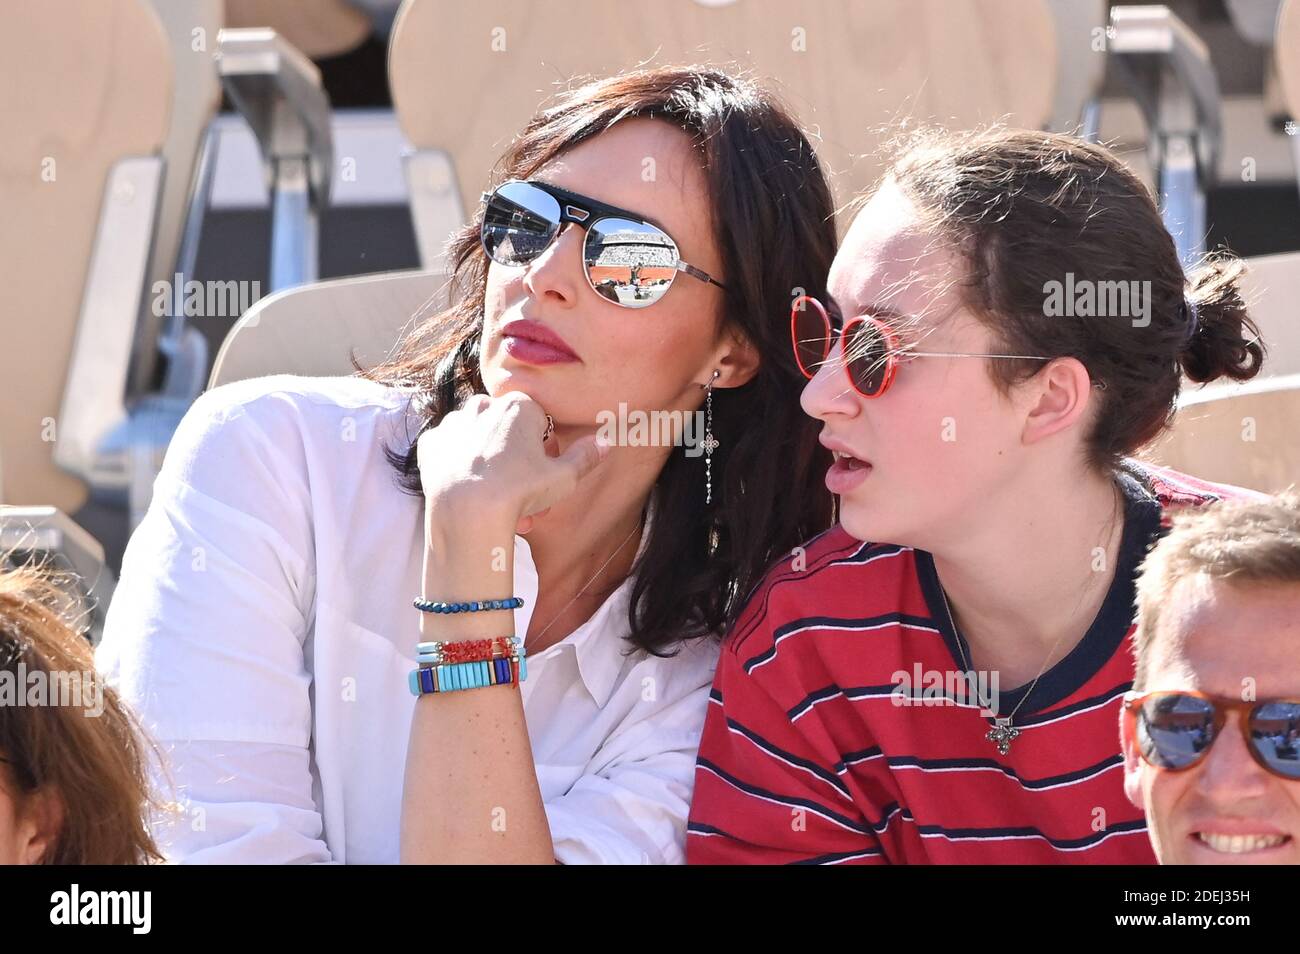 Geraldine Maillet and Daniel Riolo attend the 2019 French Tennis Open - Day  Six in Roland Garros on May 31, 2019 in Paris, France. Photo by Laurent  Zabulon / ABACAPRESS.COM Stock Photo - Alamy